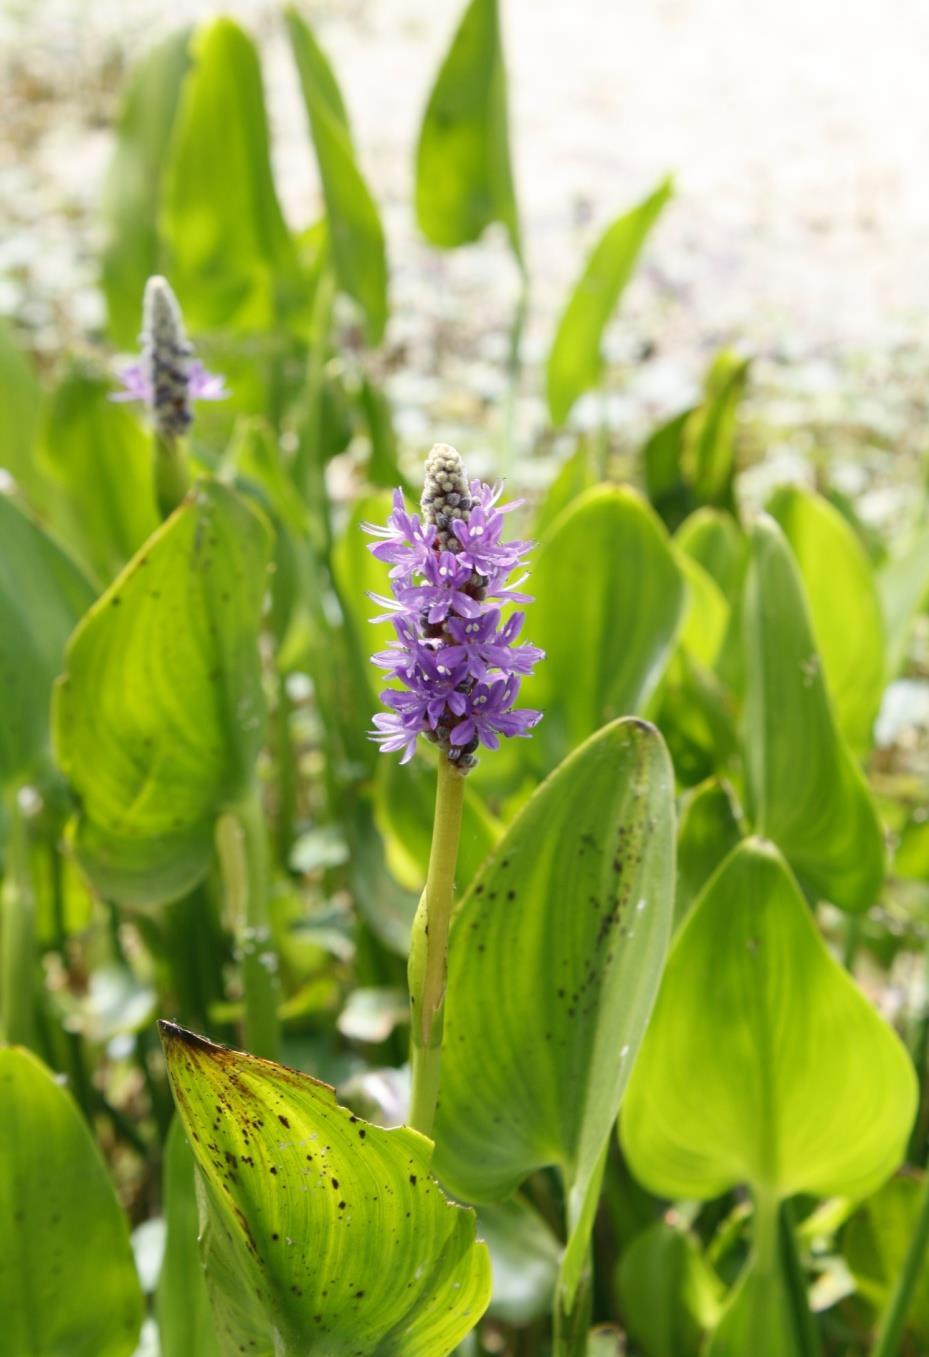 Pickerelweed This plant is a wide range aquatic plant and can be found as far north as Canada. The violet blue flowers are clustered on an upright spike.